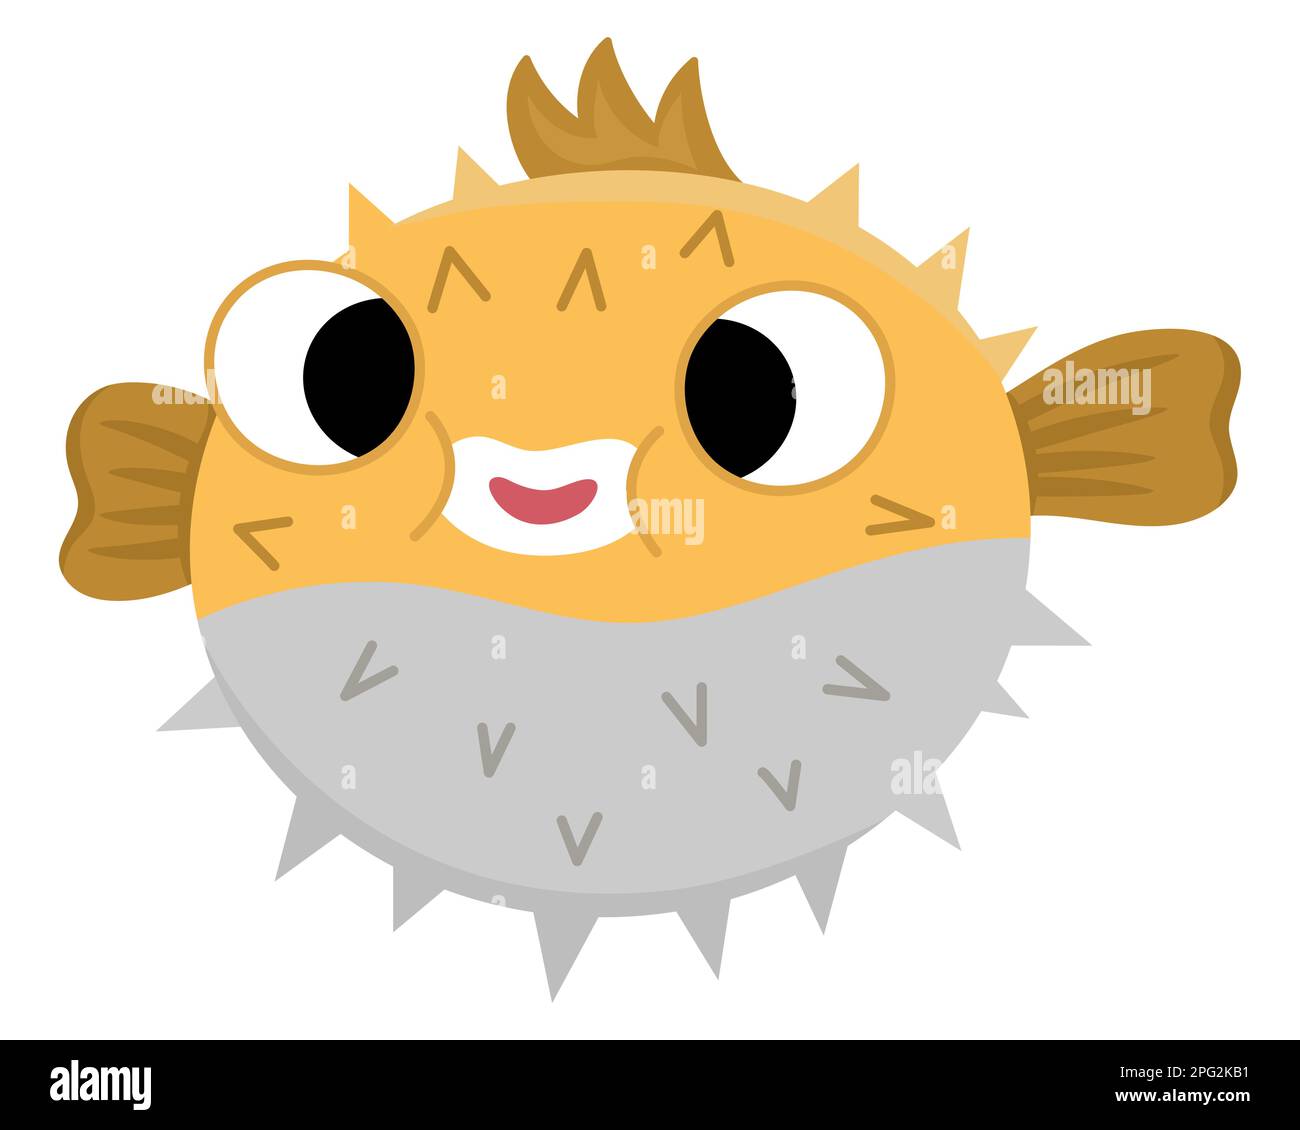 Vector blowfish icon. Under the sea illustration with cute funny